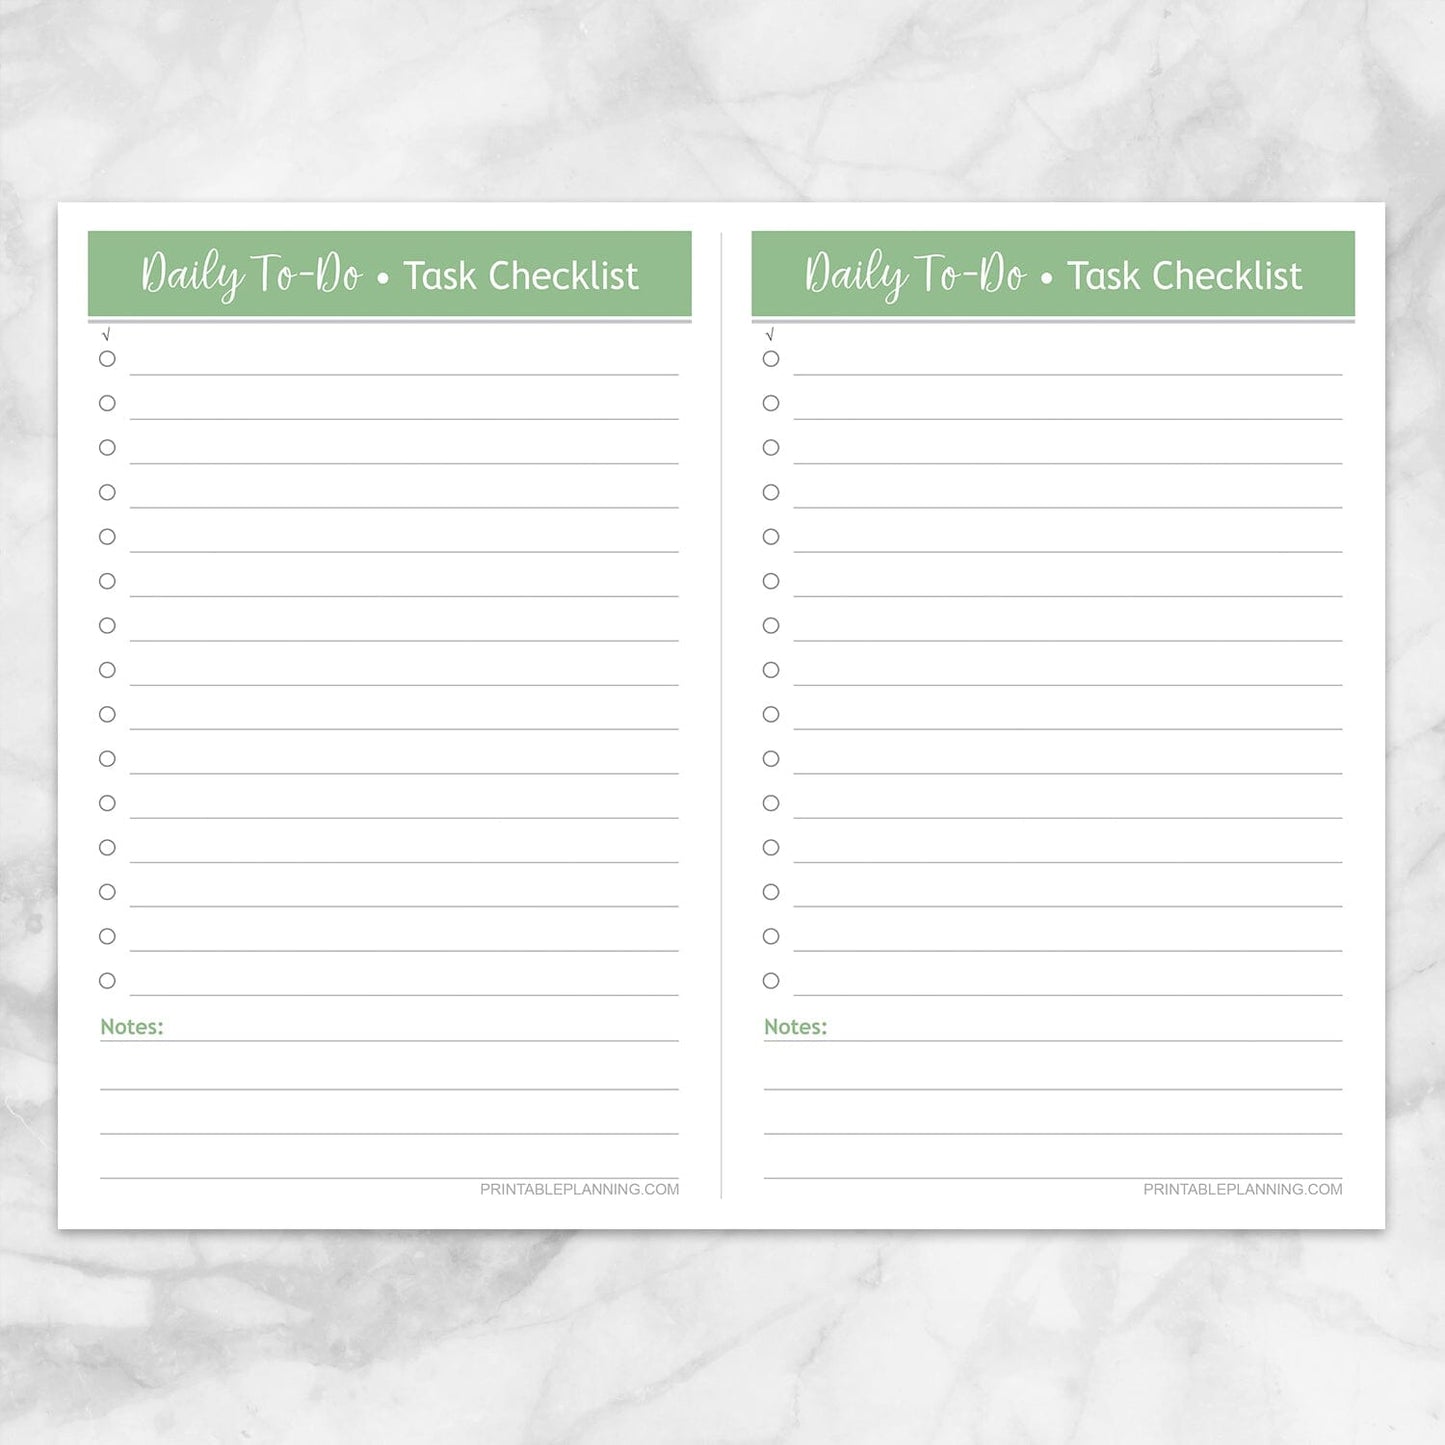 Printable Daily To-Do Lists - 2 Per Page - Task Checklists in Green at Printable Planning.